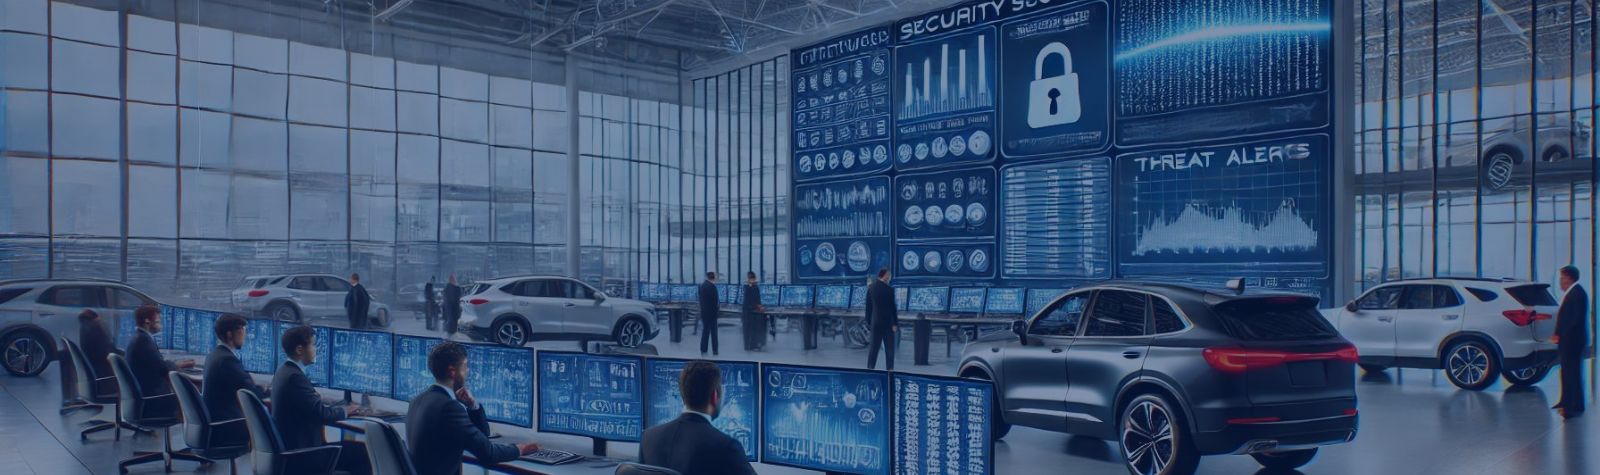 Ensuring Cybersecurity in the Automotive Industry: Lessons and Actions 